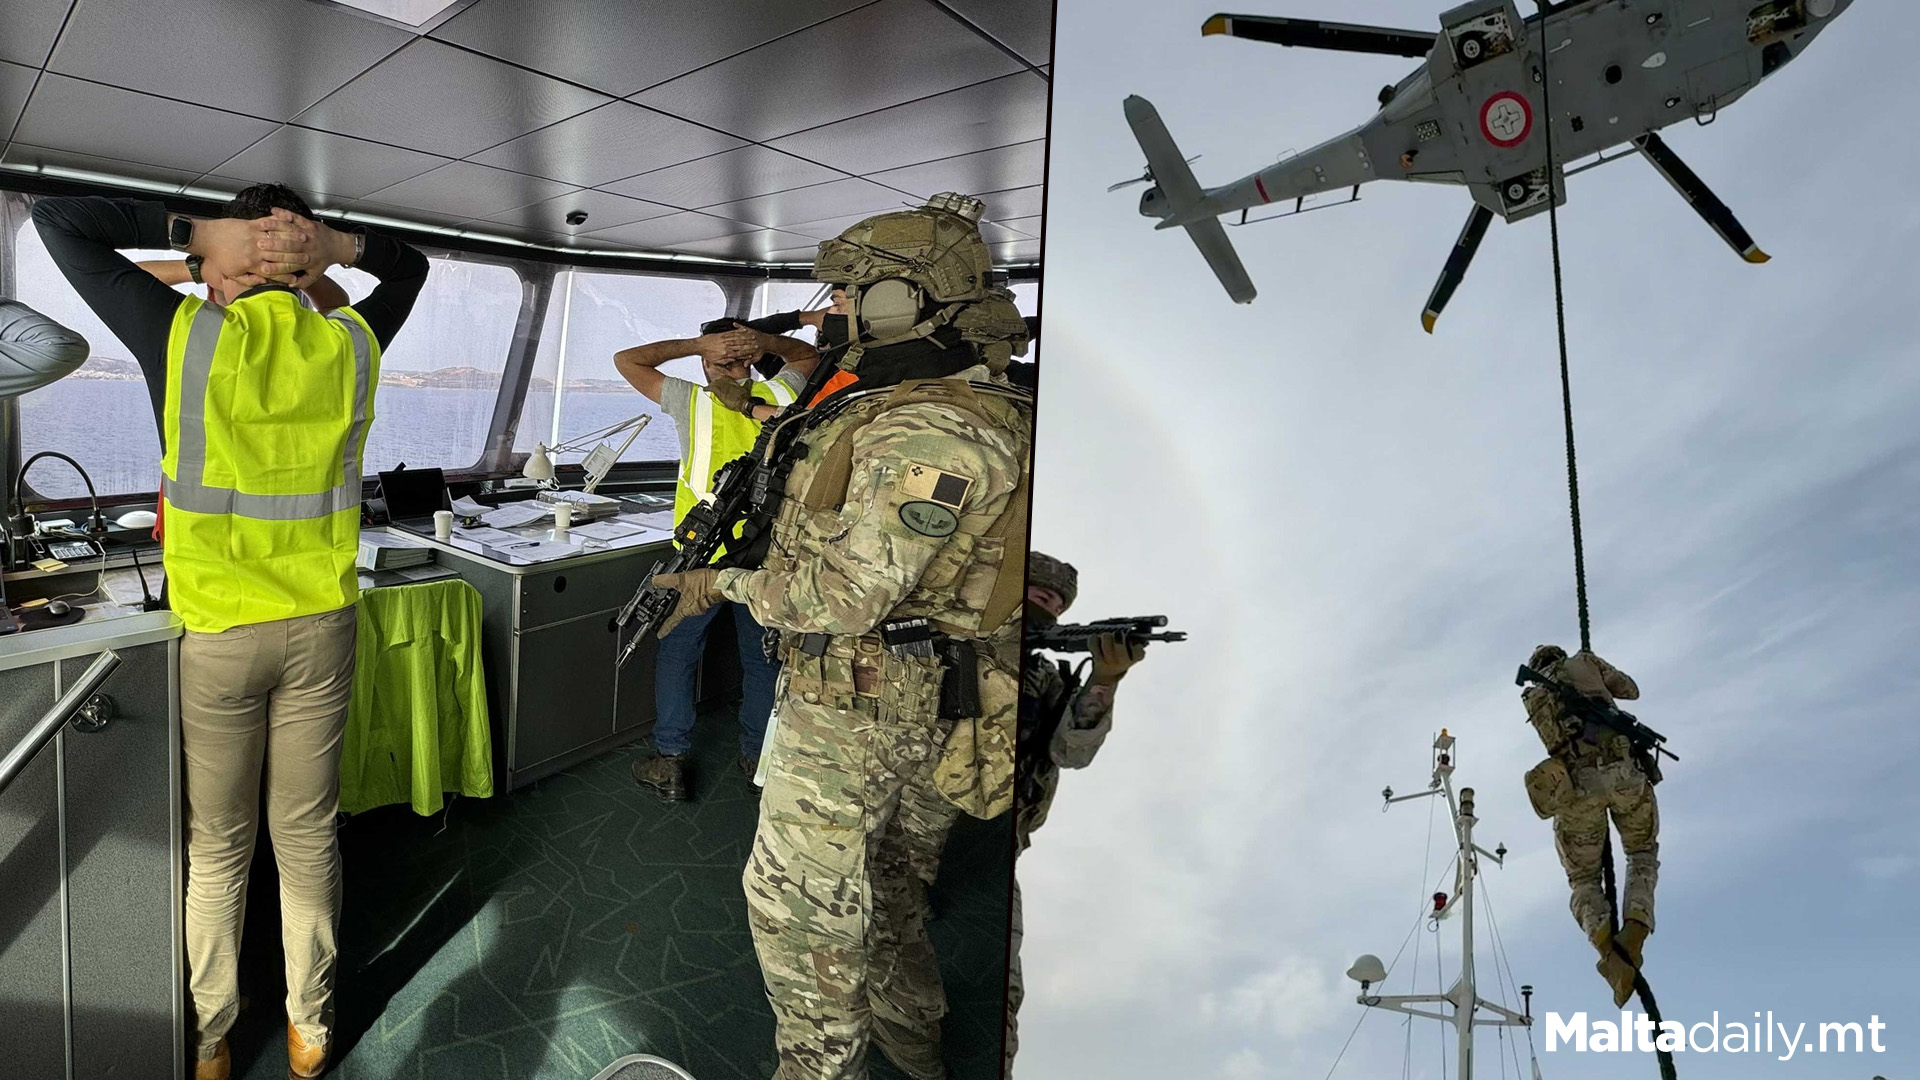 Armed Forces Of Malta In Training: Maritime Simulation